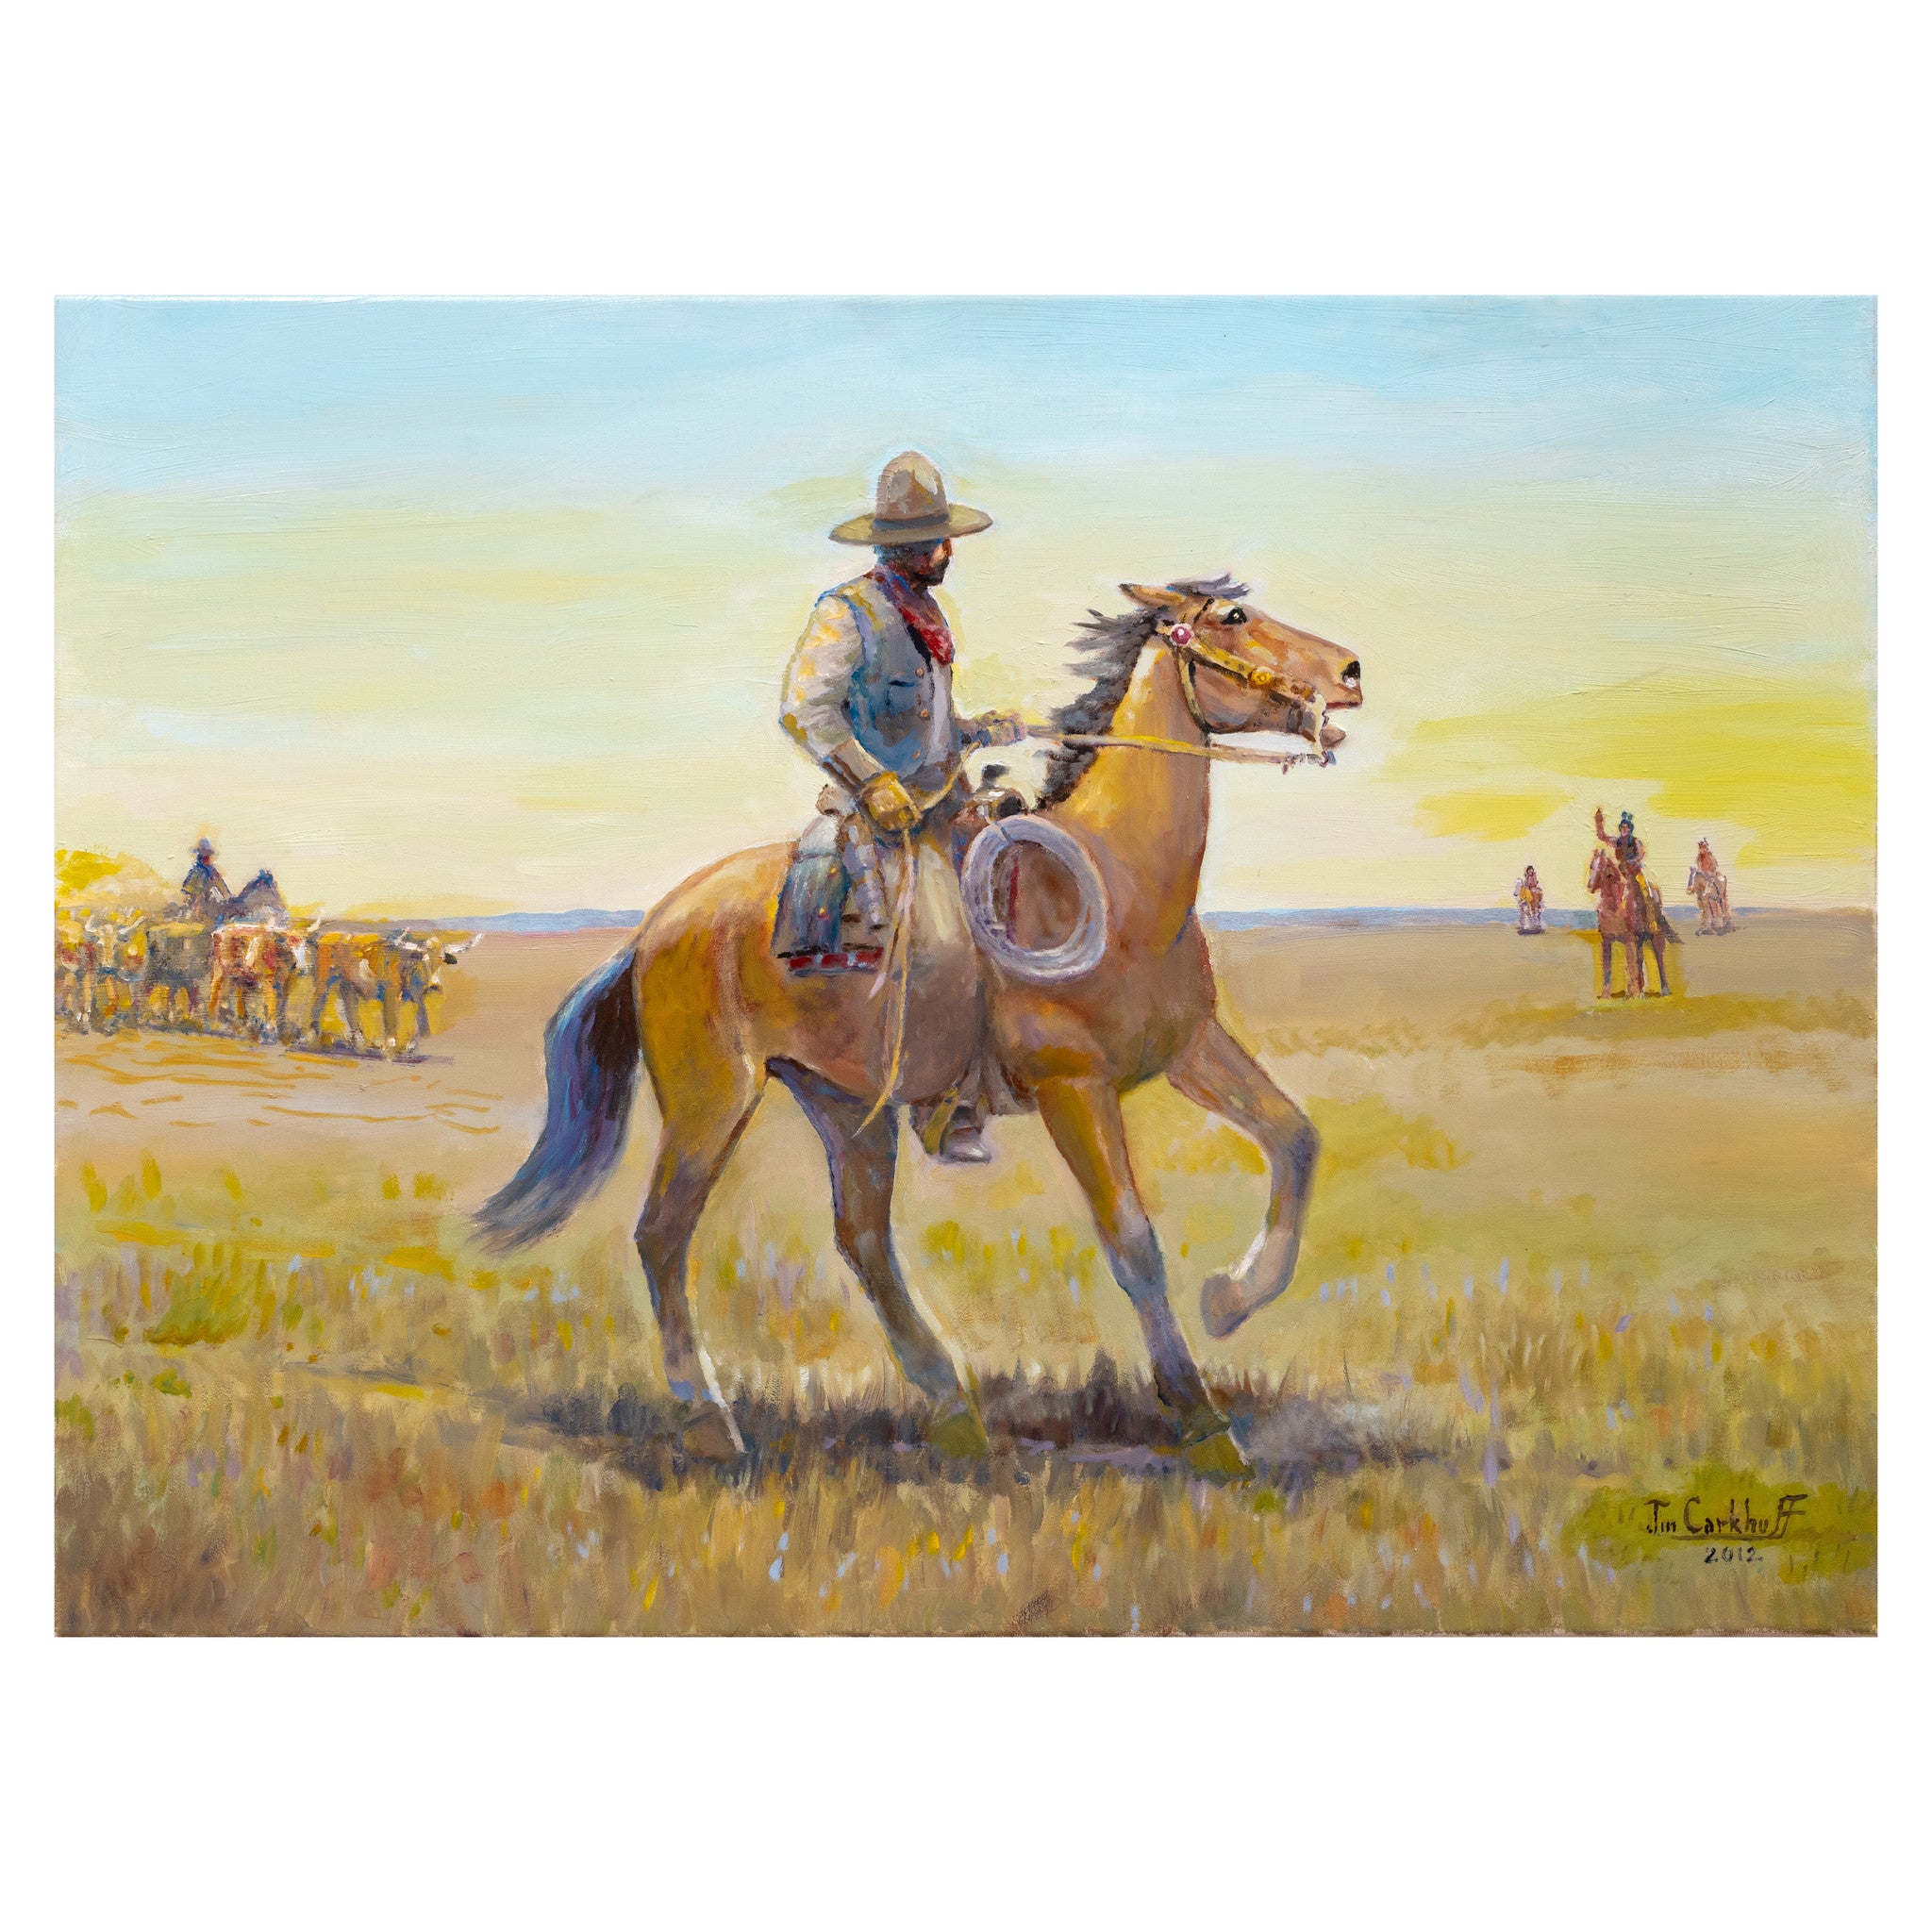 Barter for Passage by Jim Carkhuff, Fine Art, Painting, Western